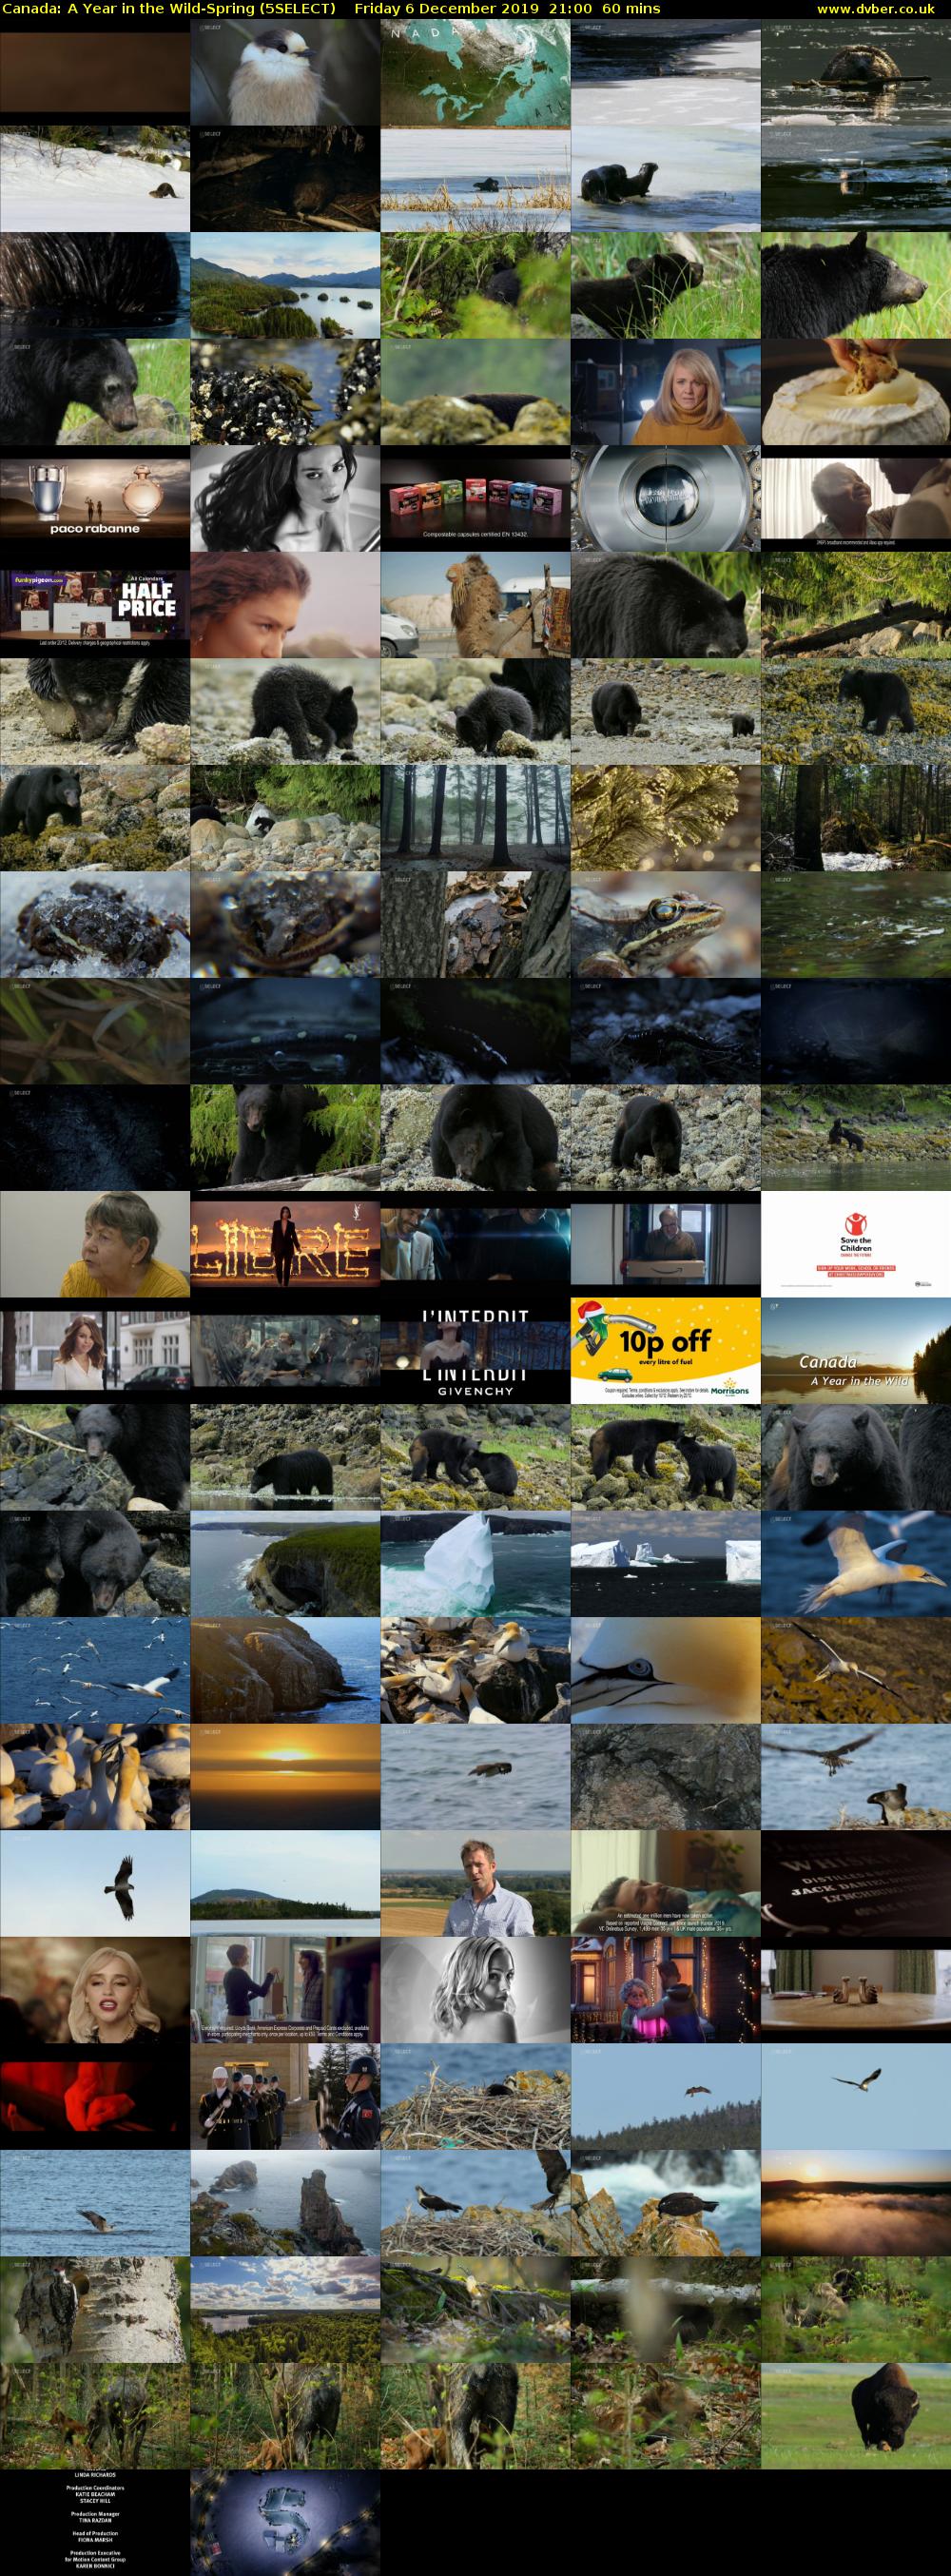 Canada: A Year in the Wild-Spring (5SELECT) Friday 6 December 2019 21:00 - 22:00